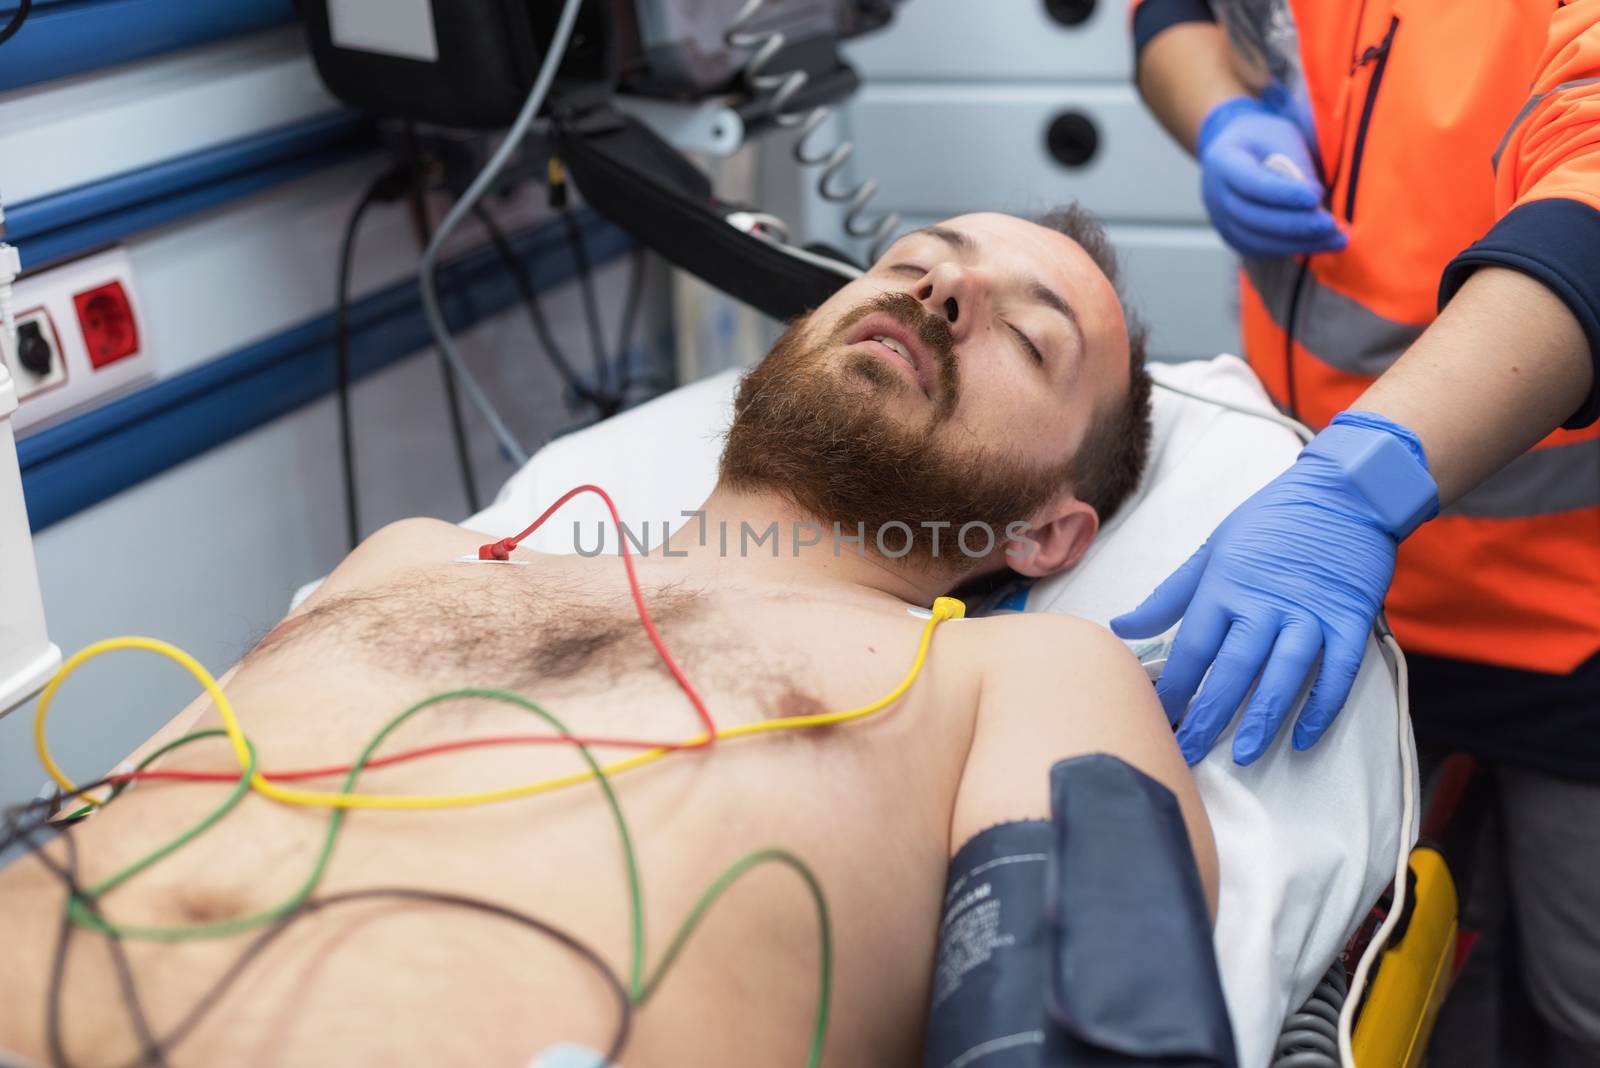 ecg electrodes on patient chest in ambulance